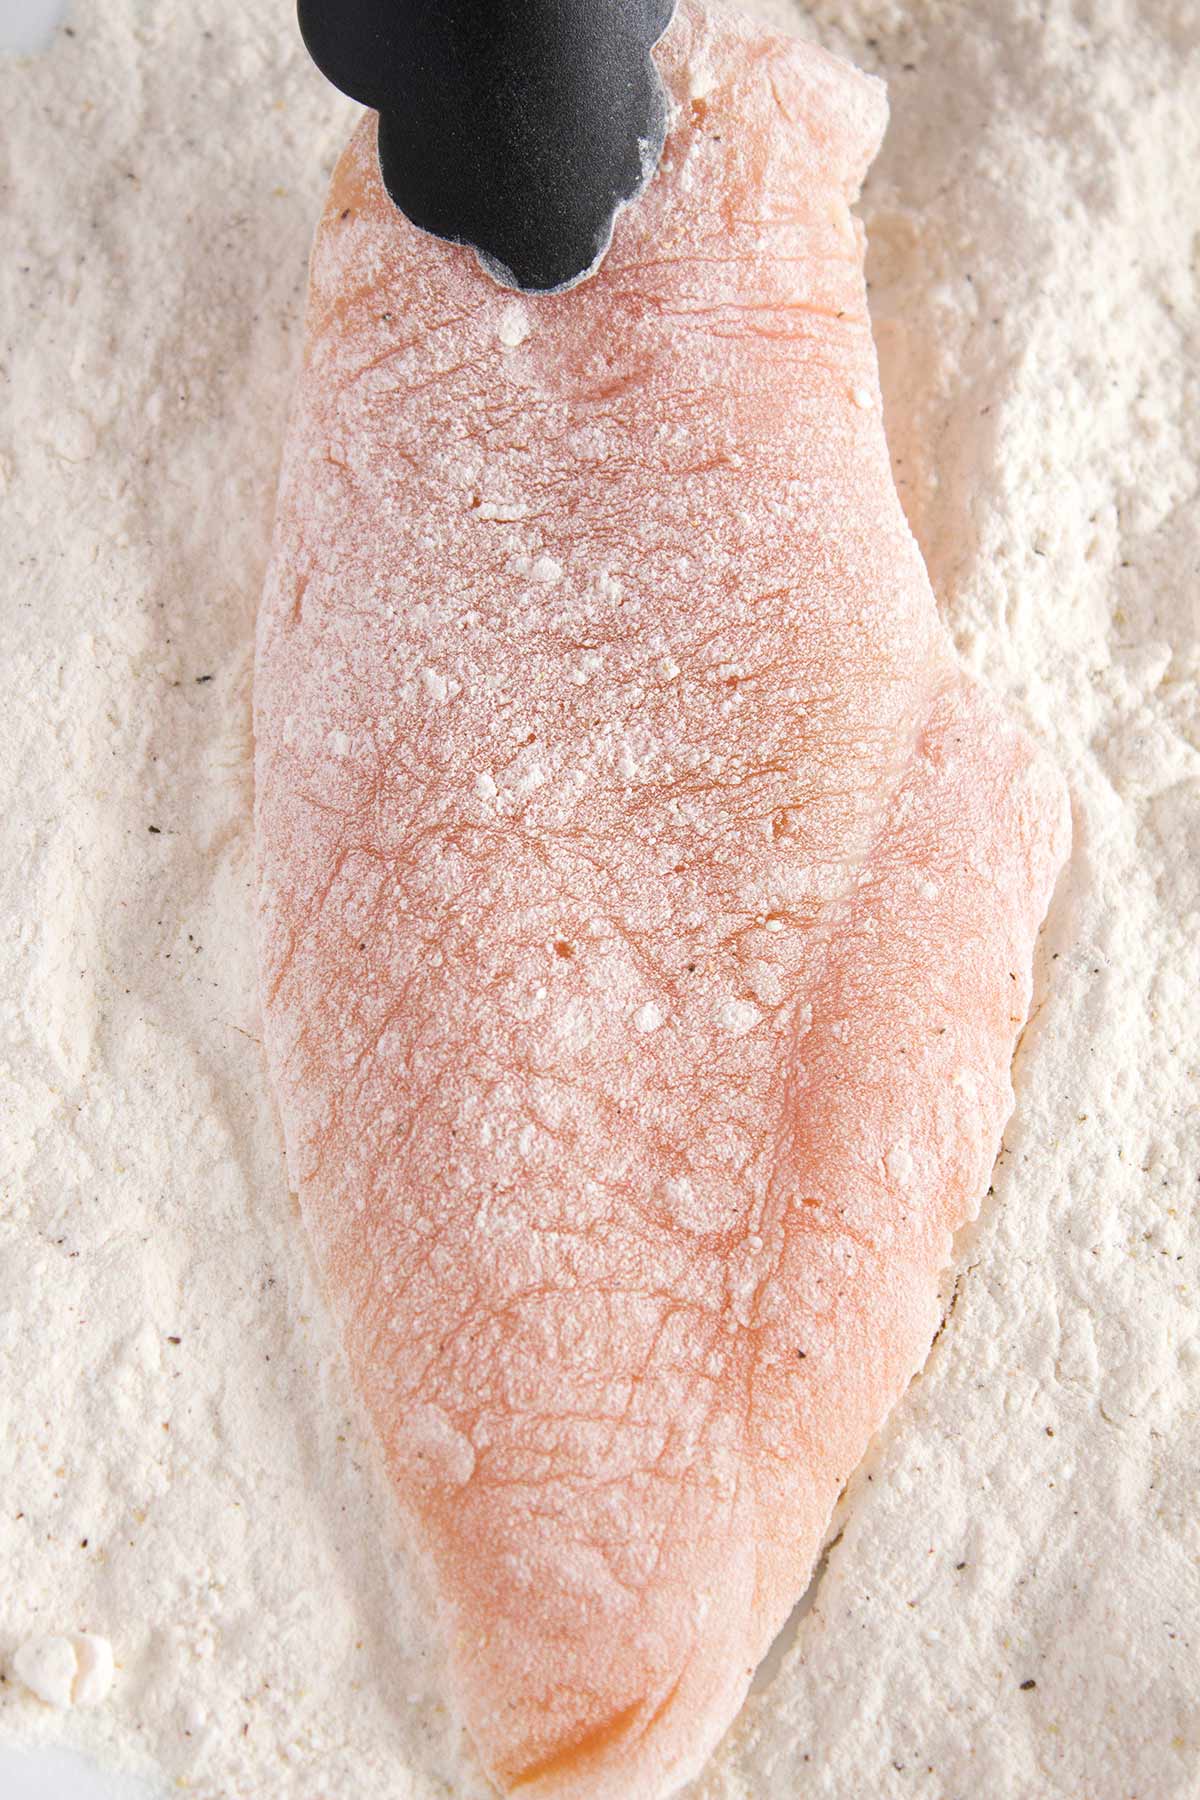 Coating a chicken breast in flour.